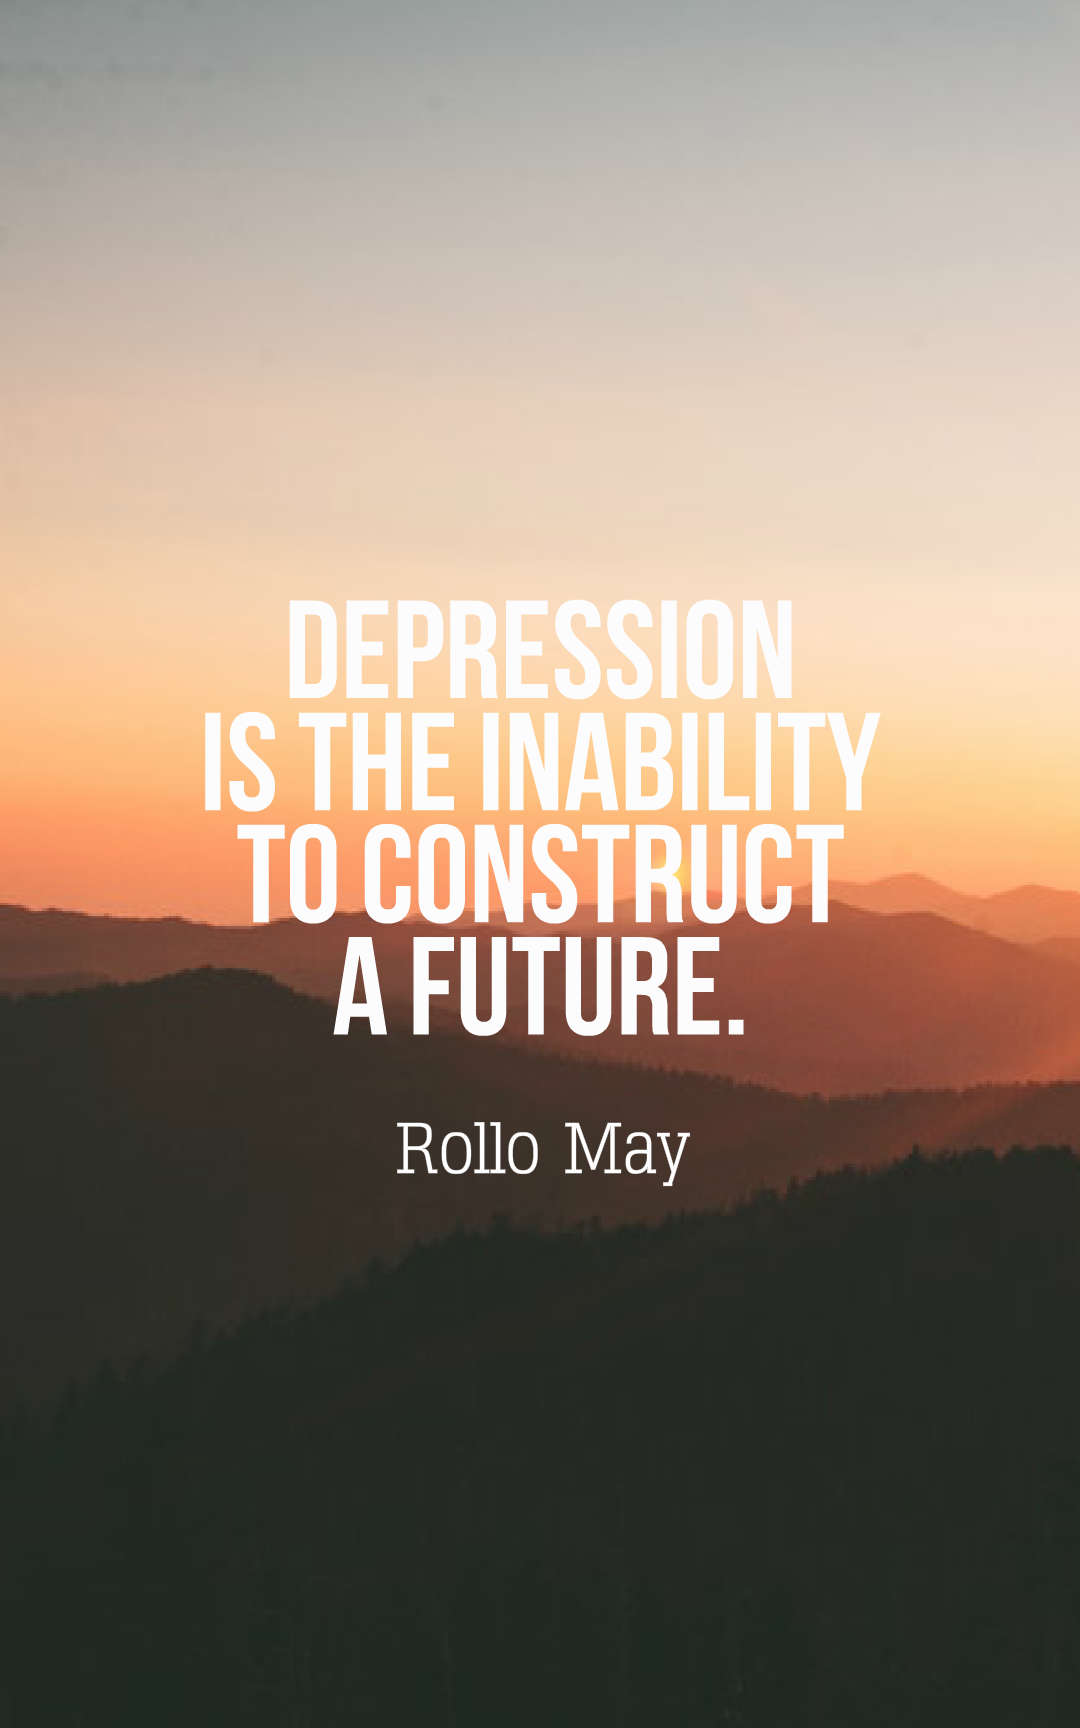 Inspirational Quotes For Depression Wallpapers - MAXIPX